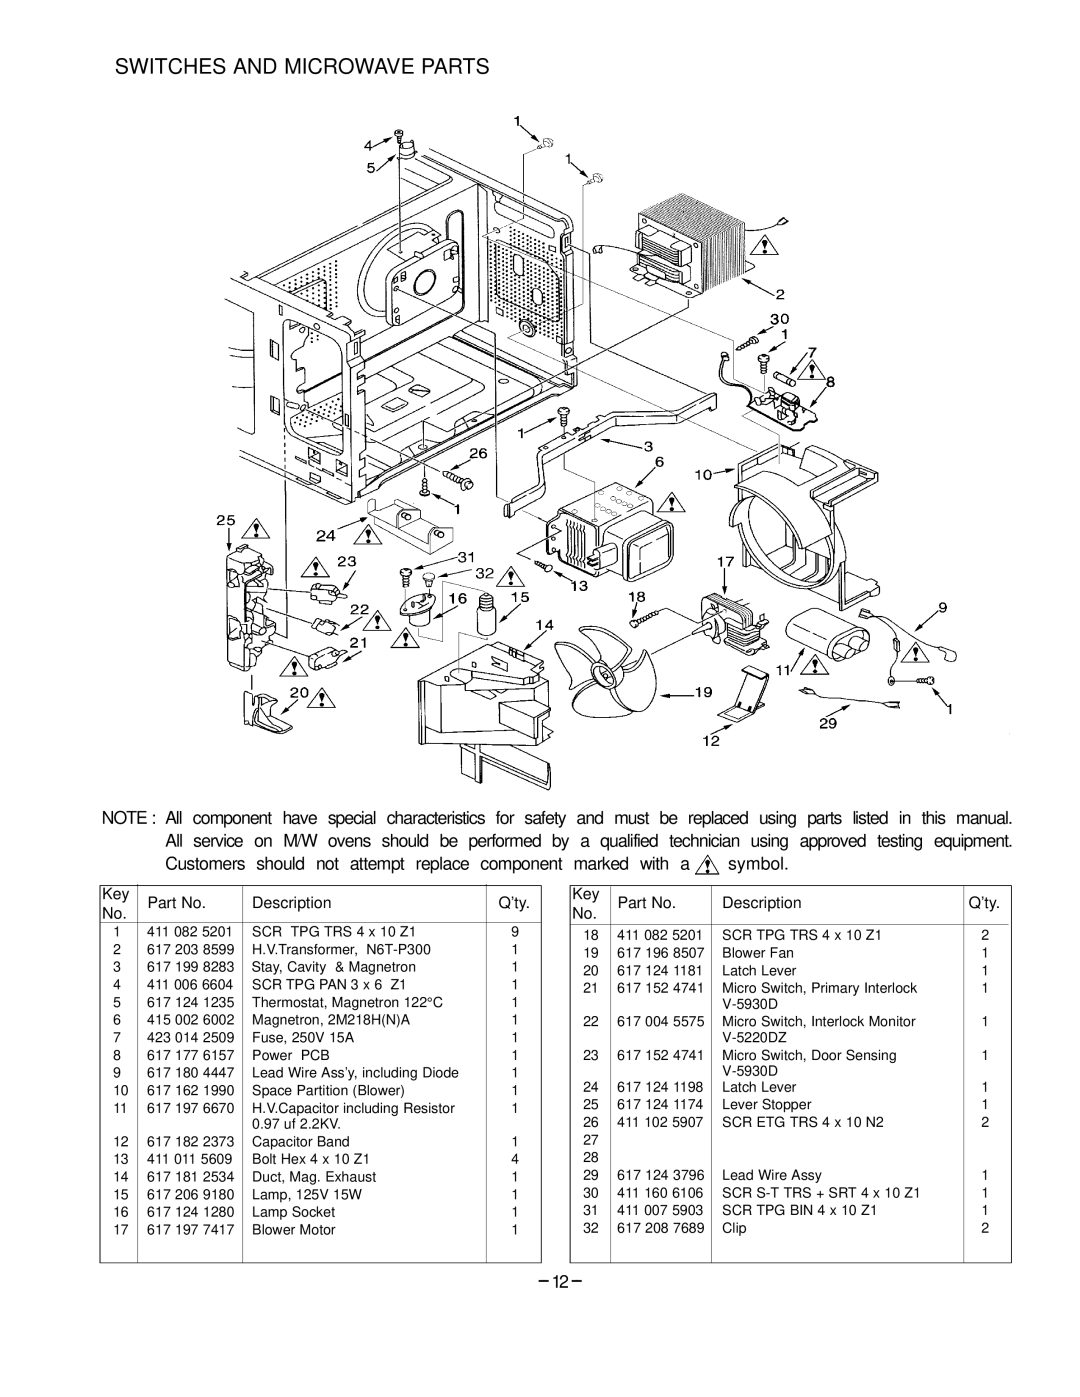 Garland EM-S85 service manual Switches And Microwave Parts 